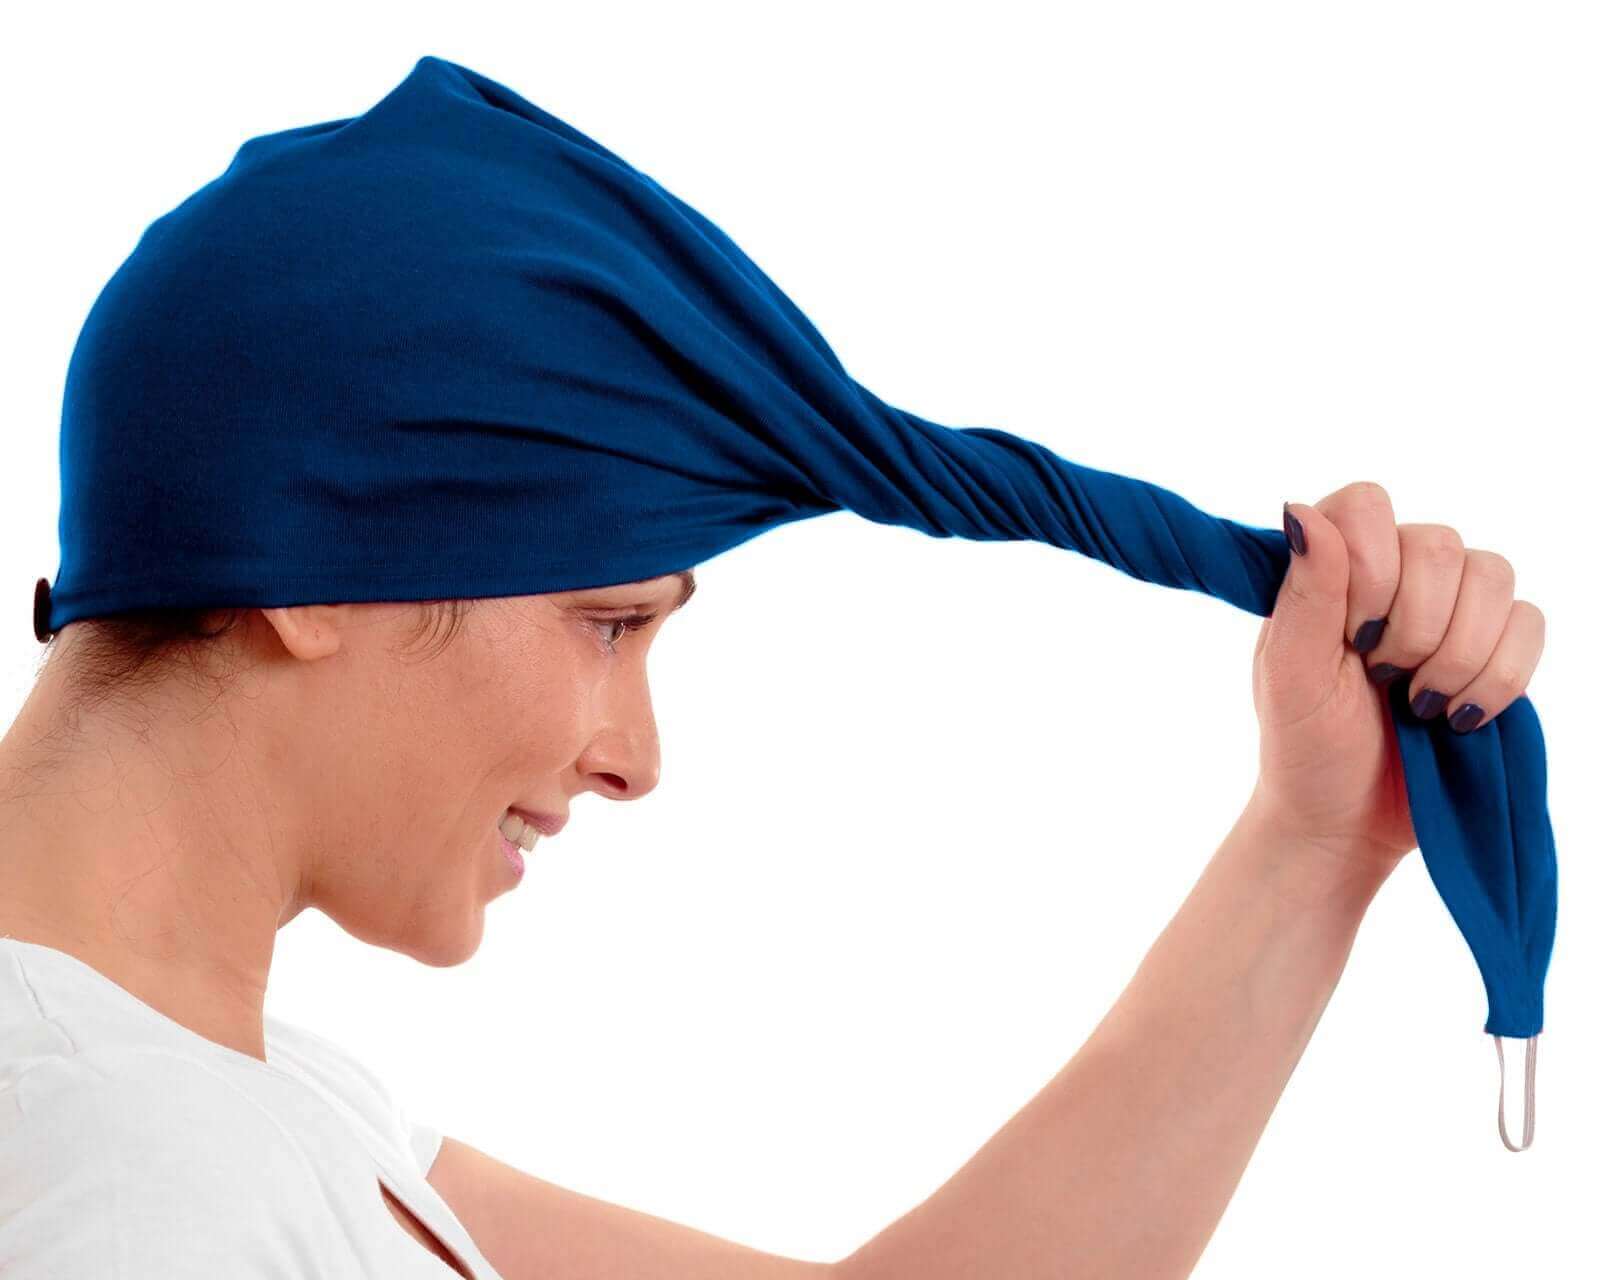 Indigo Blue T-Shirt Hair Towel Hood for Curly, Wavy, and Straight Hair - Soft, Absorbent, and Eco-Friendly